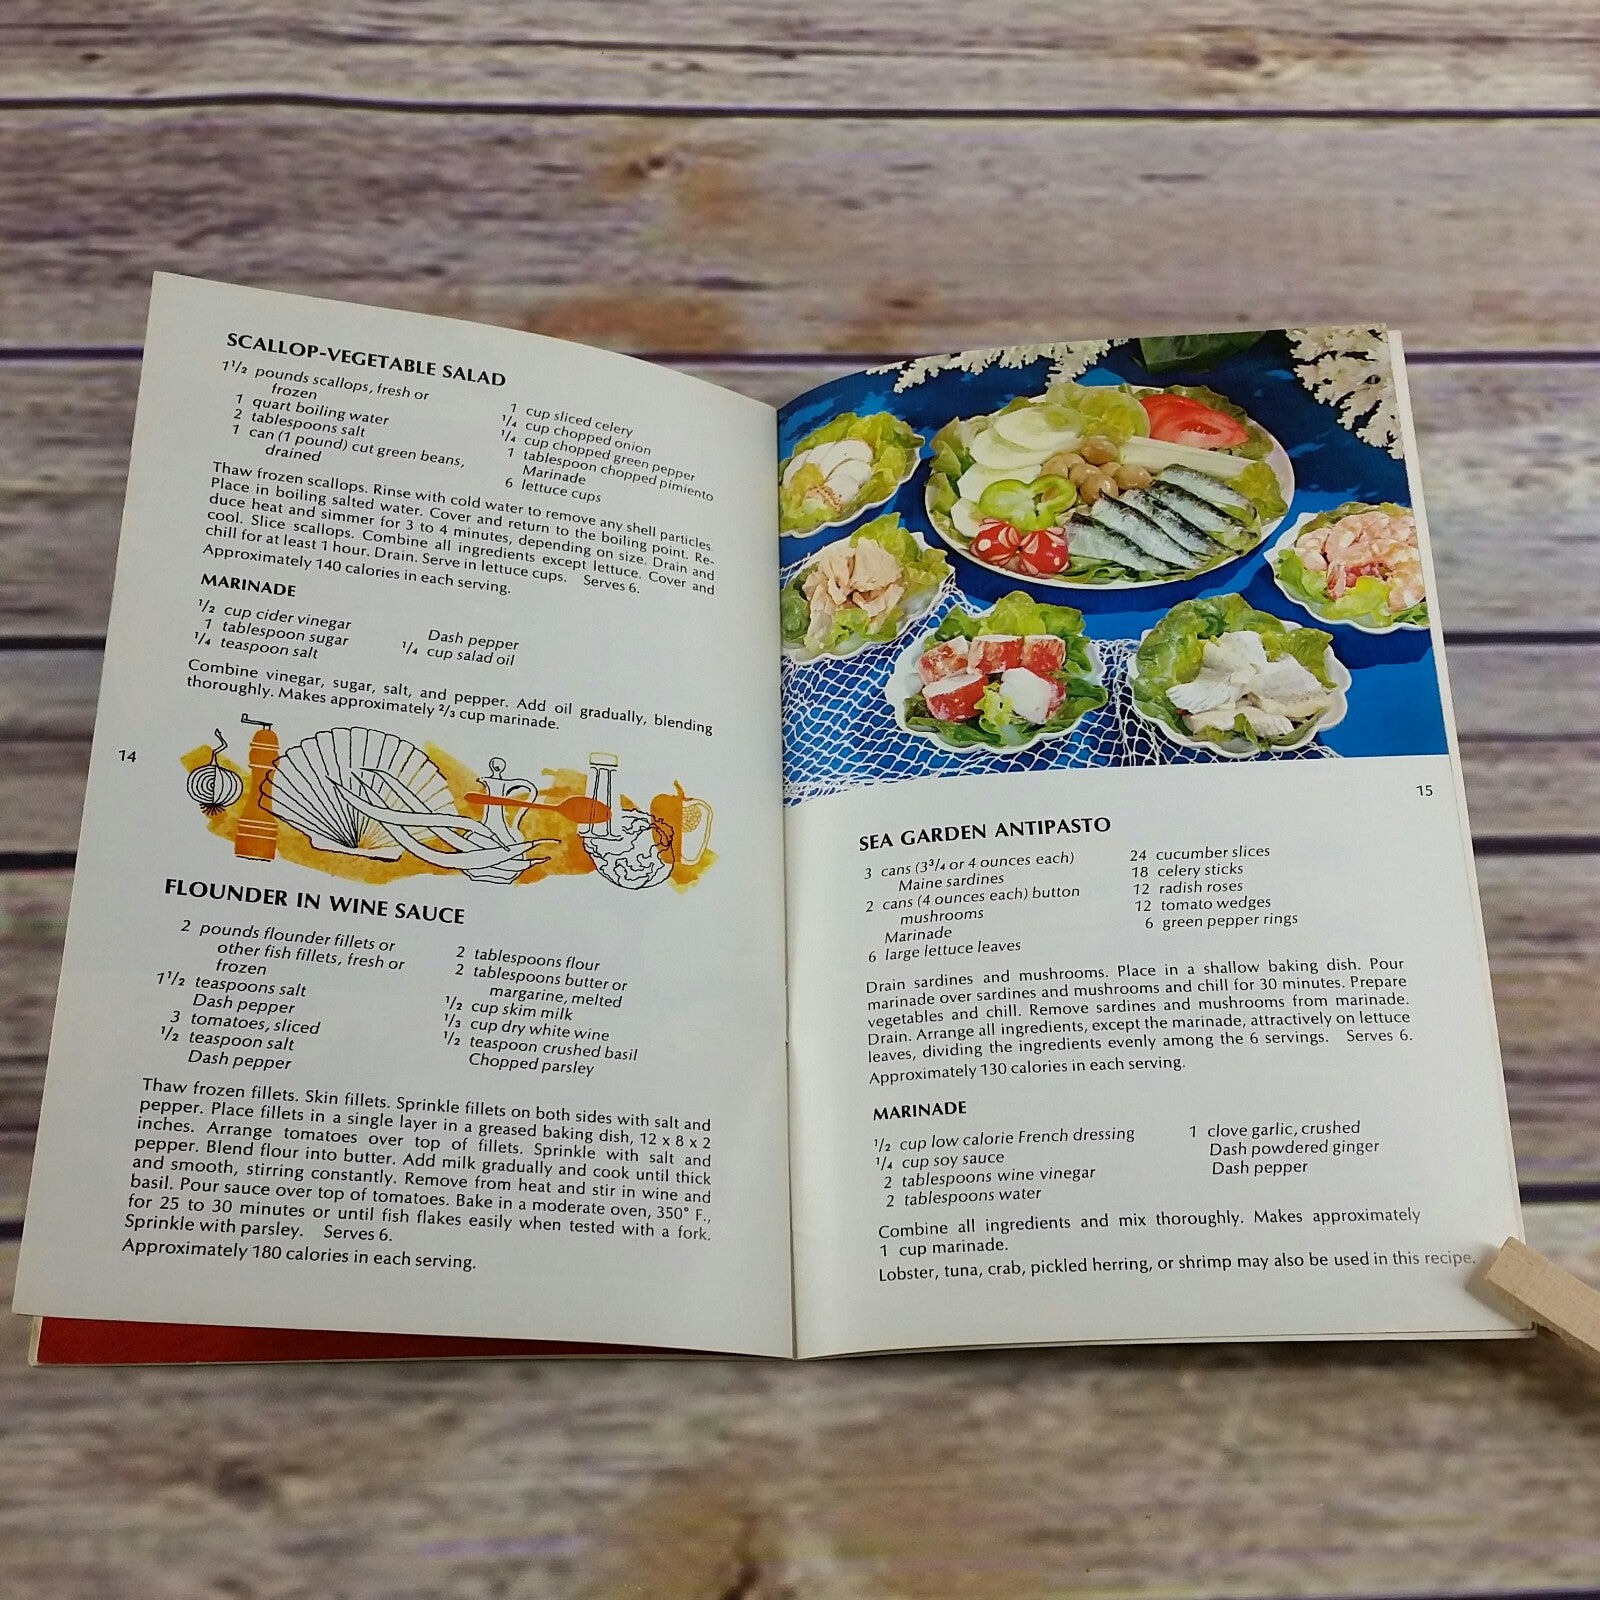 Vintage Seafood Cookbook Seafood Slimmers Recipes 1966 United States Department of the Interior Fishery Market Development - At Grandma's Table